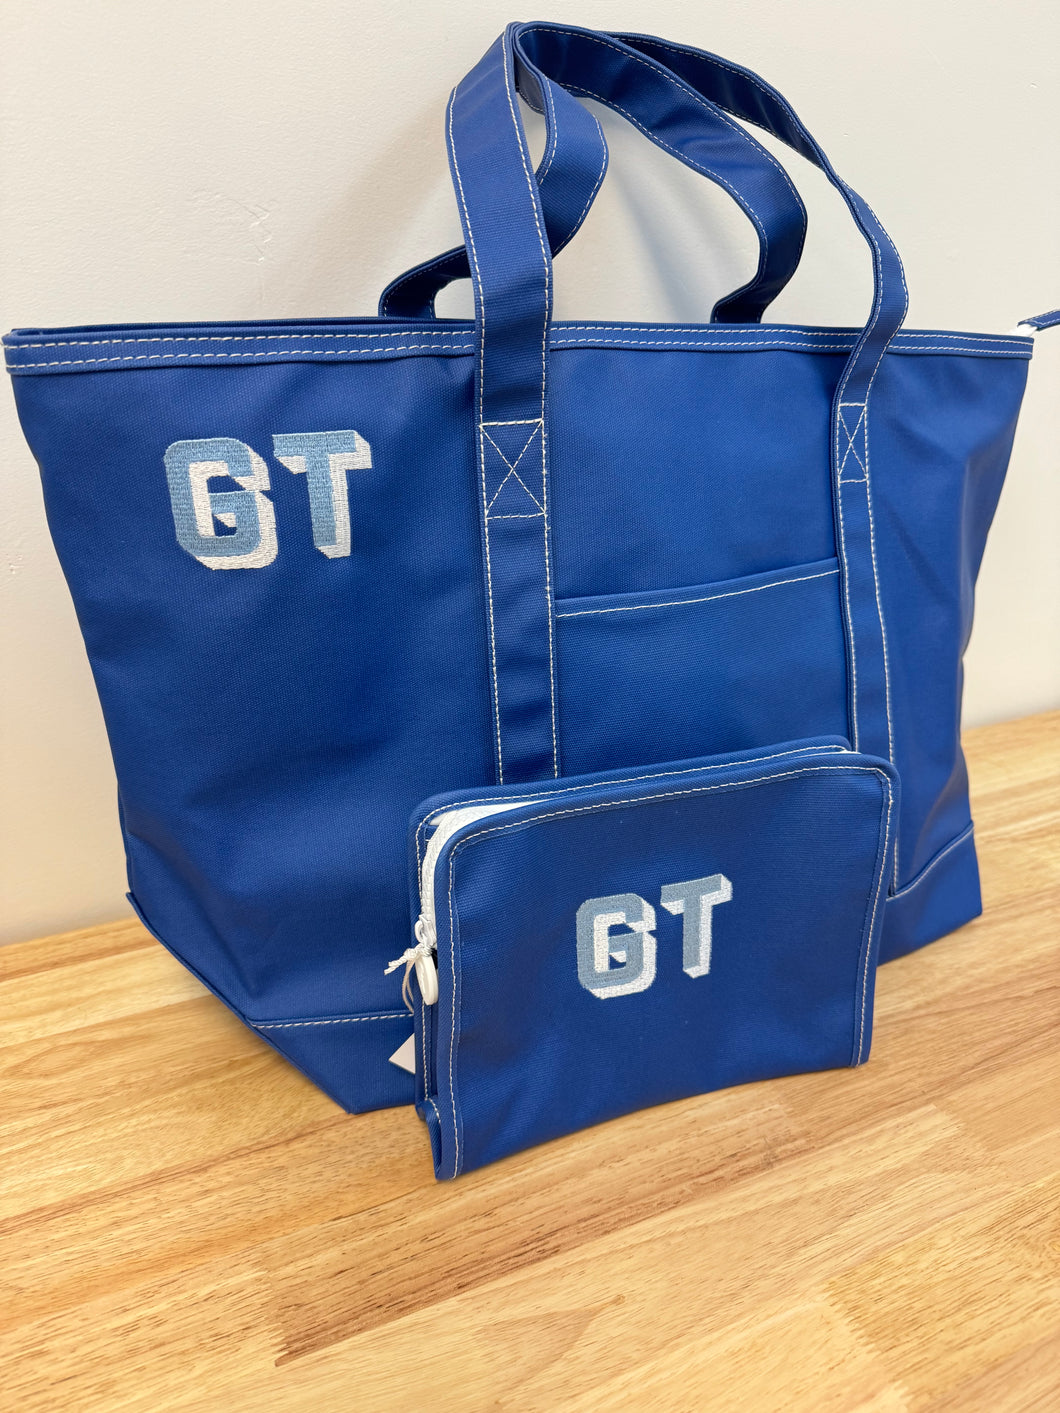 NEW TRVL Coated Canvas Totes